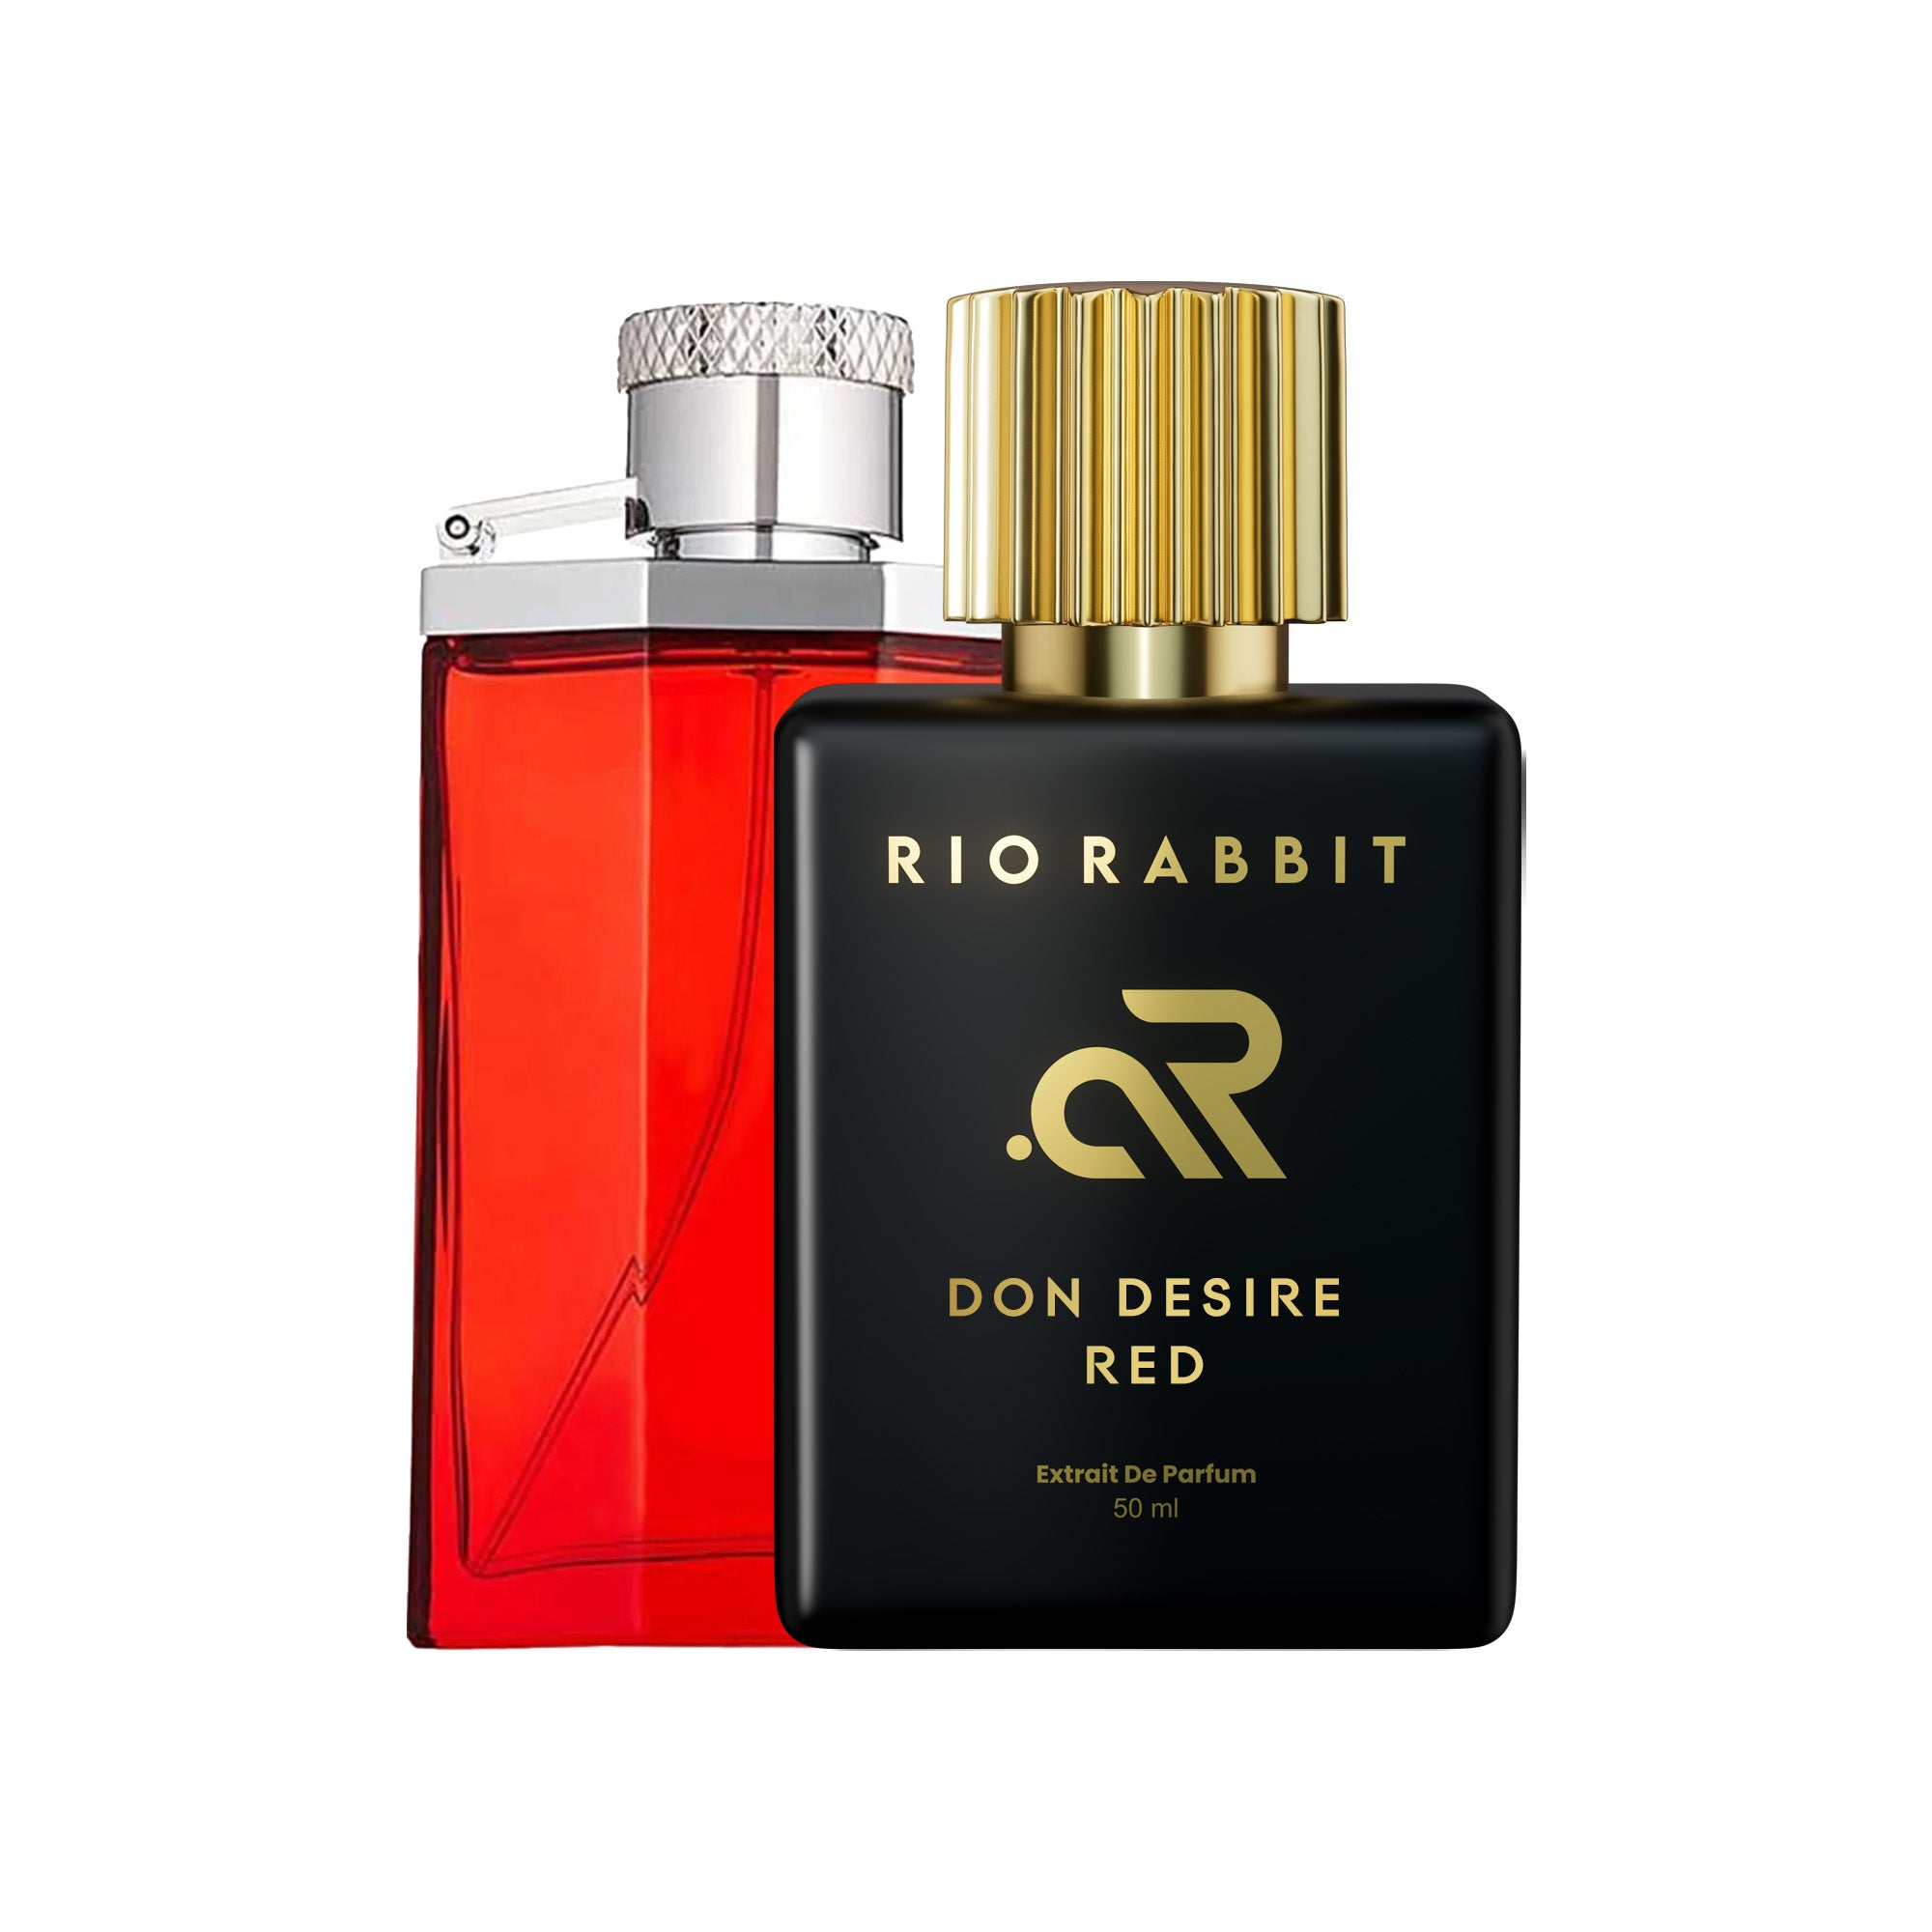 DON DESIRE RED